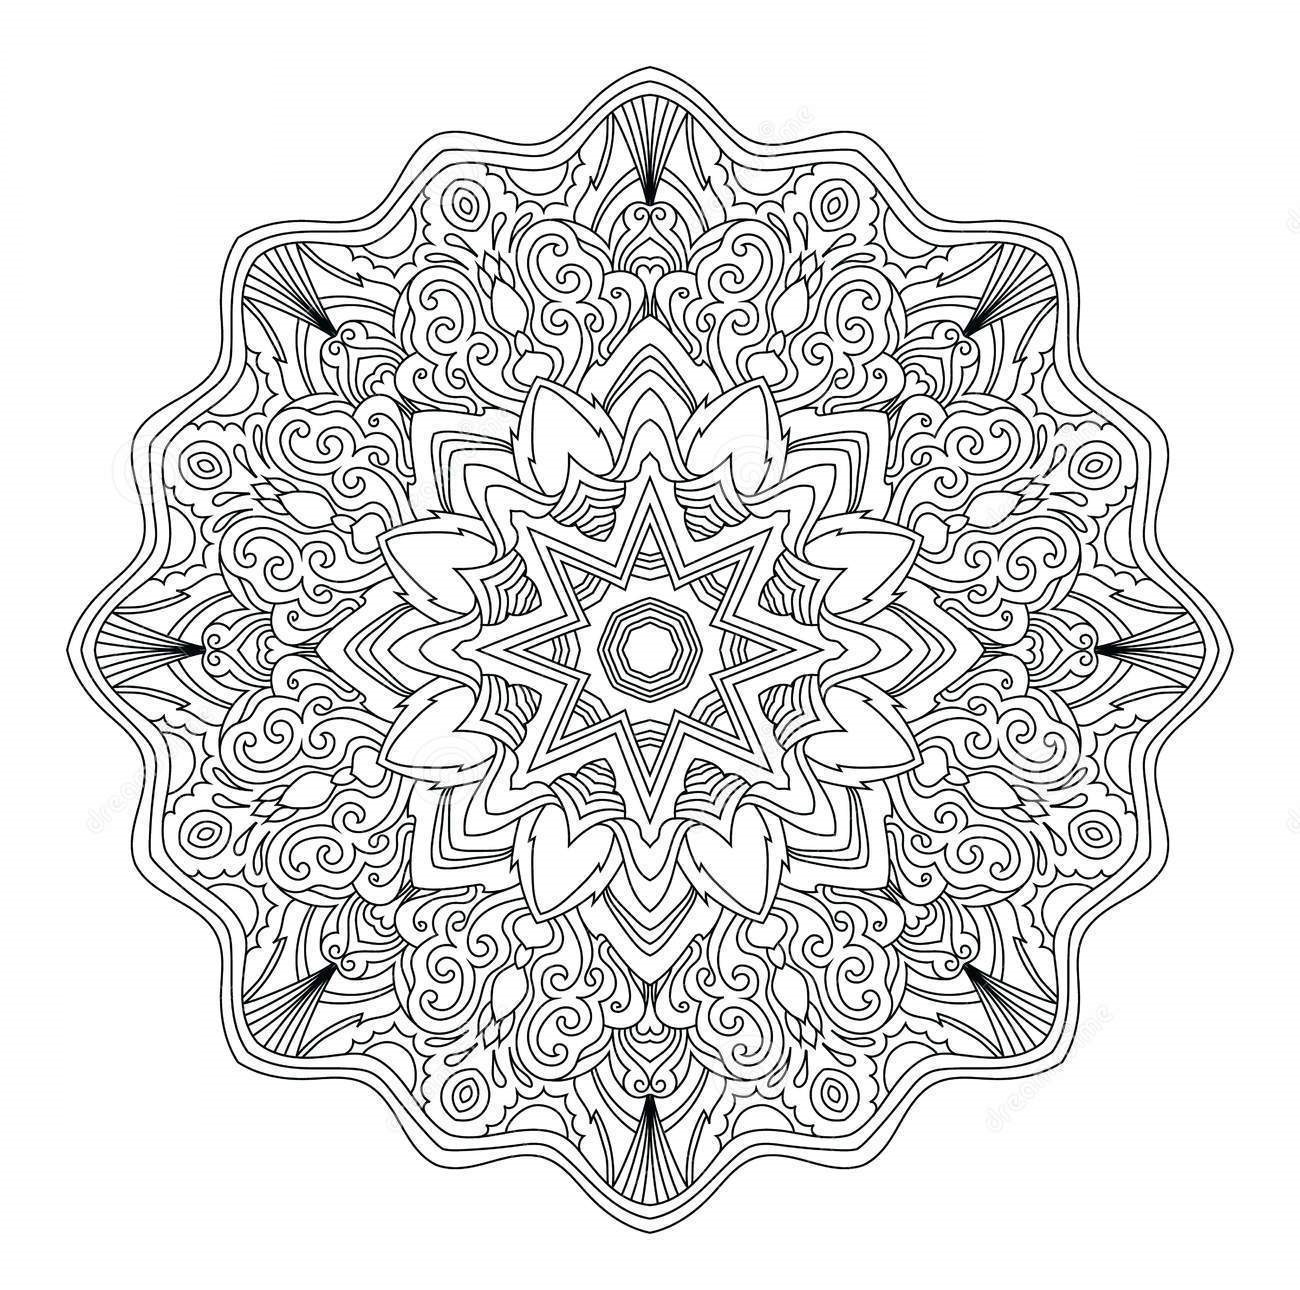 Mandala Adult Abstract Art Therapy Coloring Page